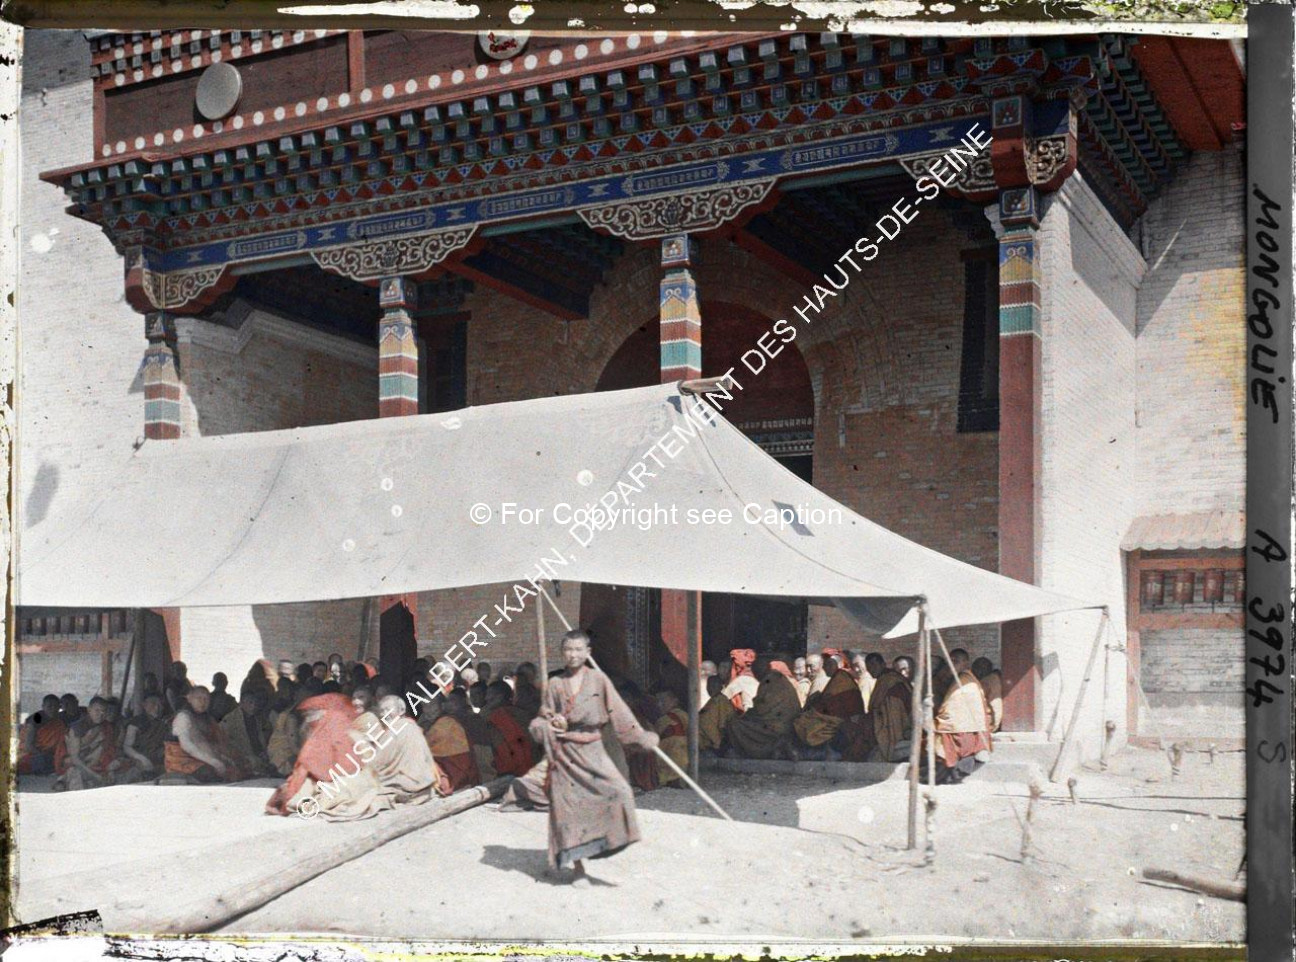 Monks gathering in front of Janraiseg Temple. Musée Albert-Kahn. A3974S. Photo by Stéphane Passet, 2